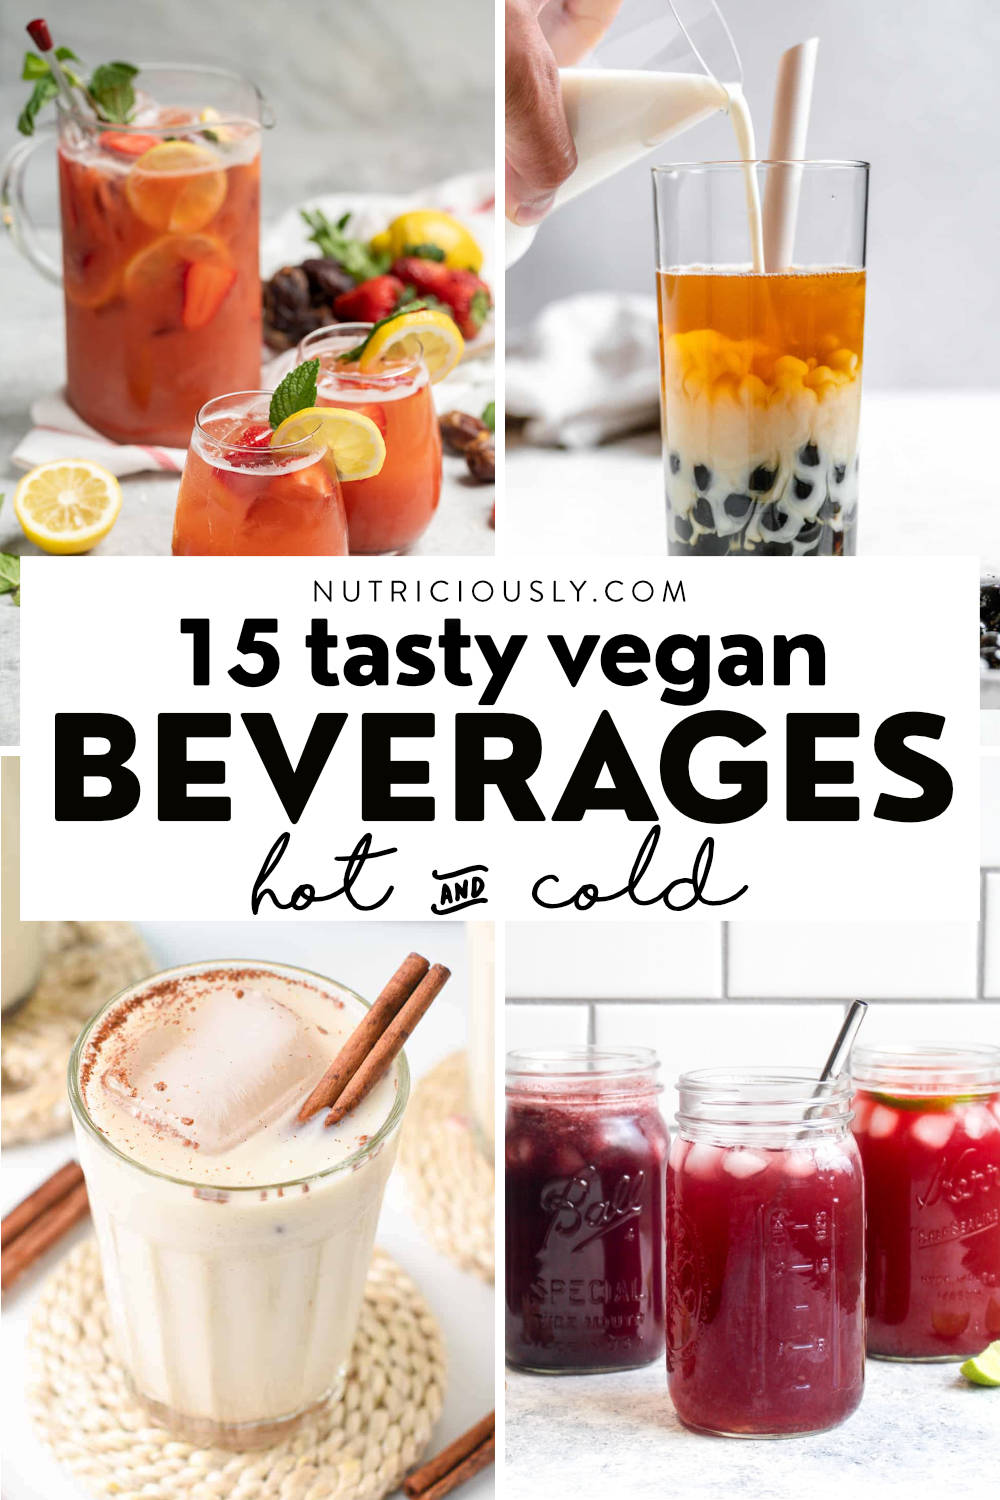 18 Delicious Vegan Drinks & Beverages (Hot + Cold) – Nutriciously